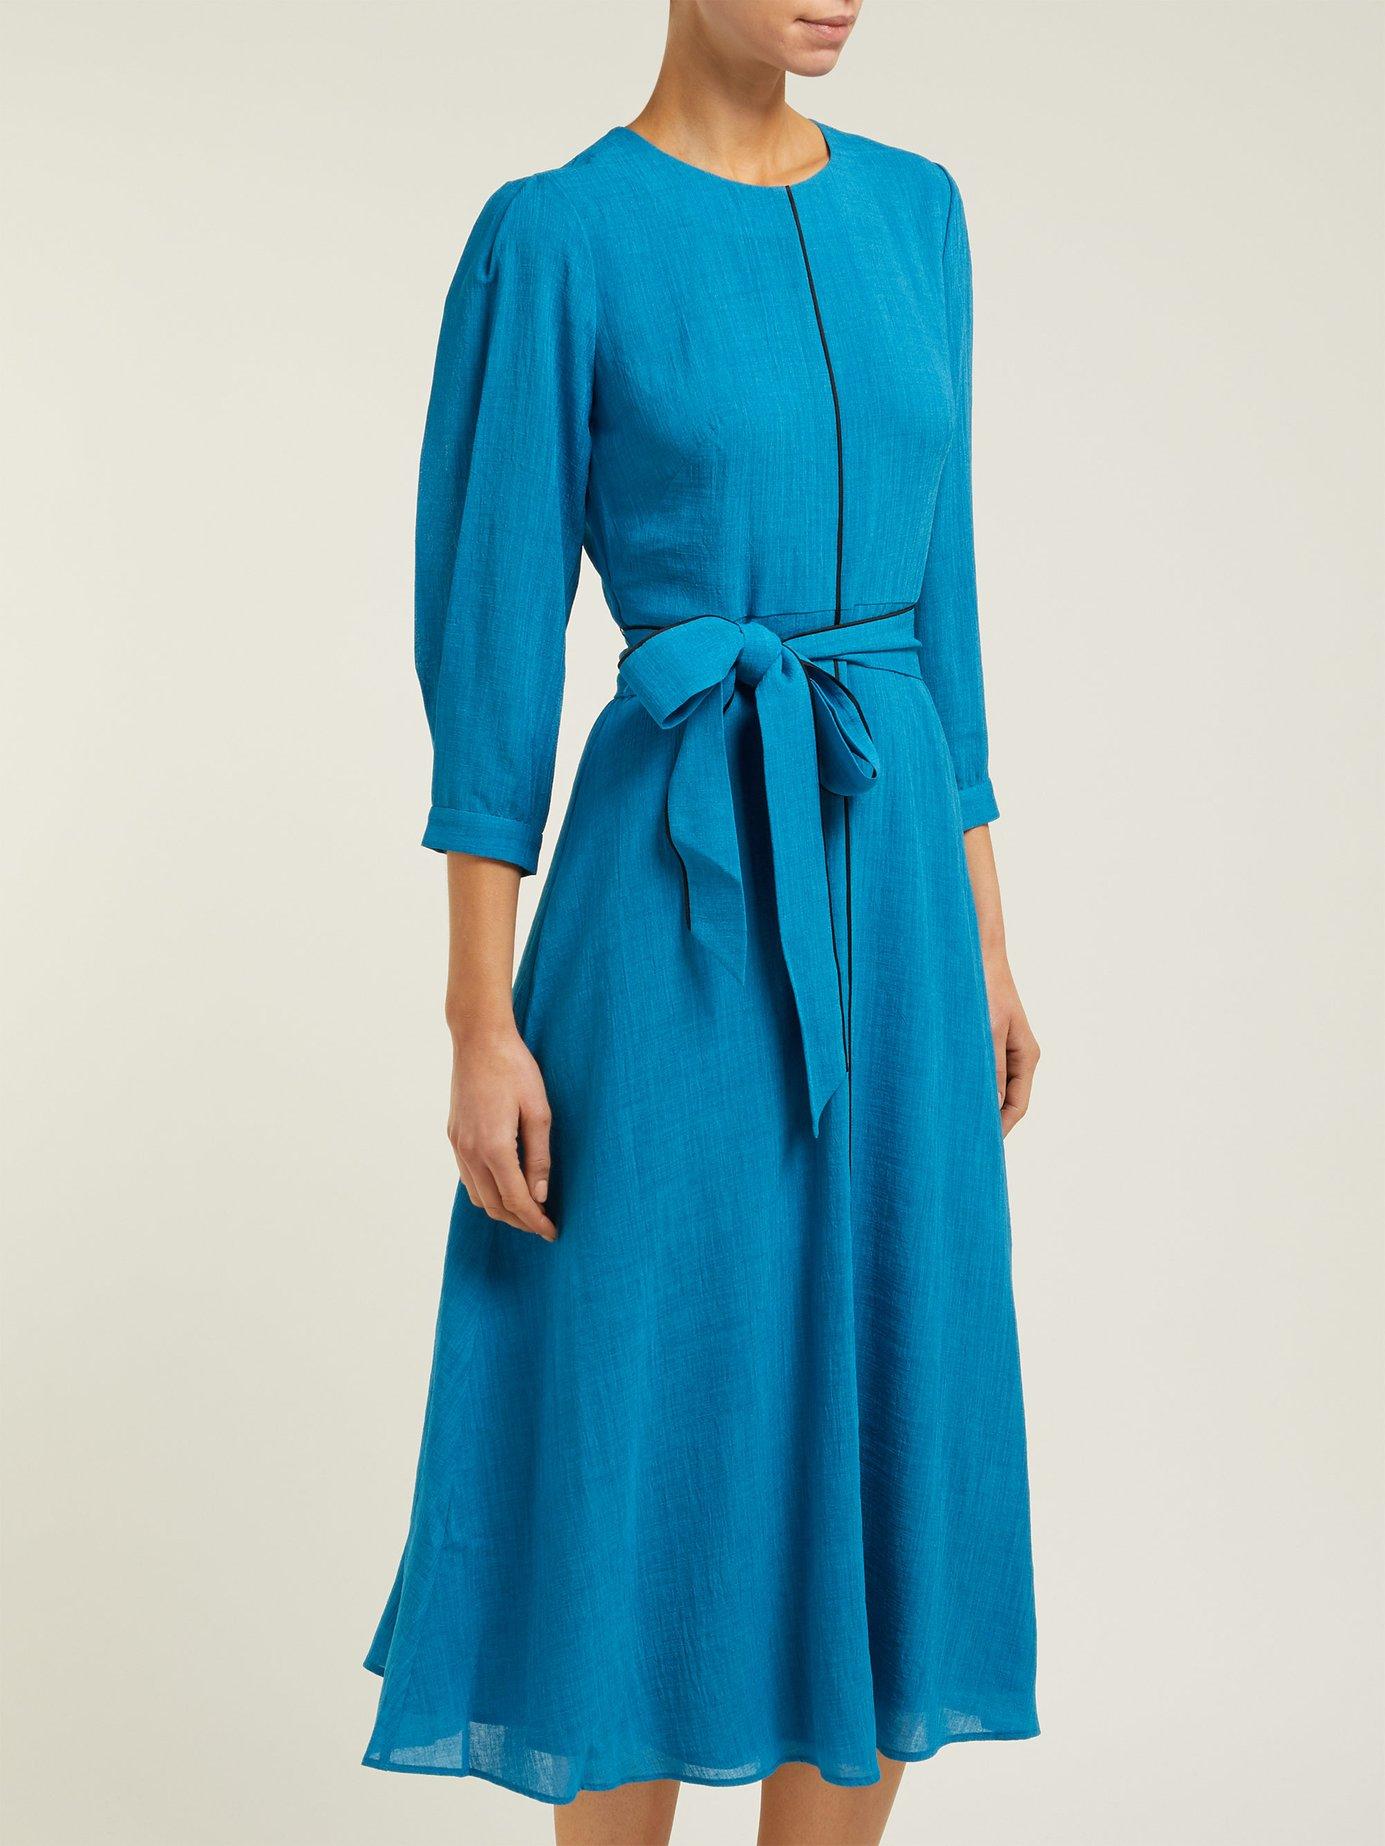 Cefinn Isabel Belted Woven Midi Dress in Turquoise (Blue) - Lyst